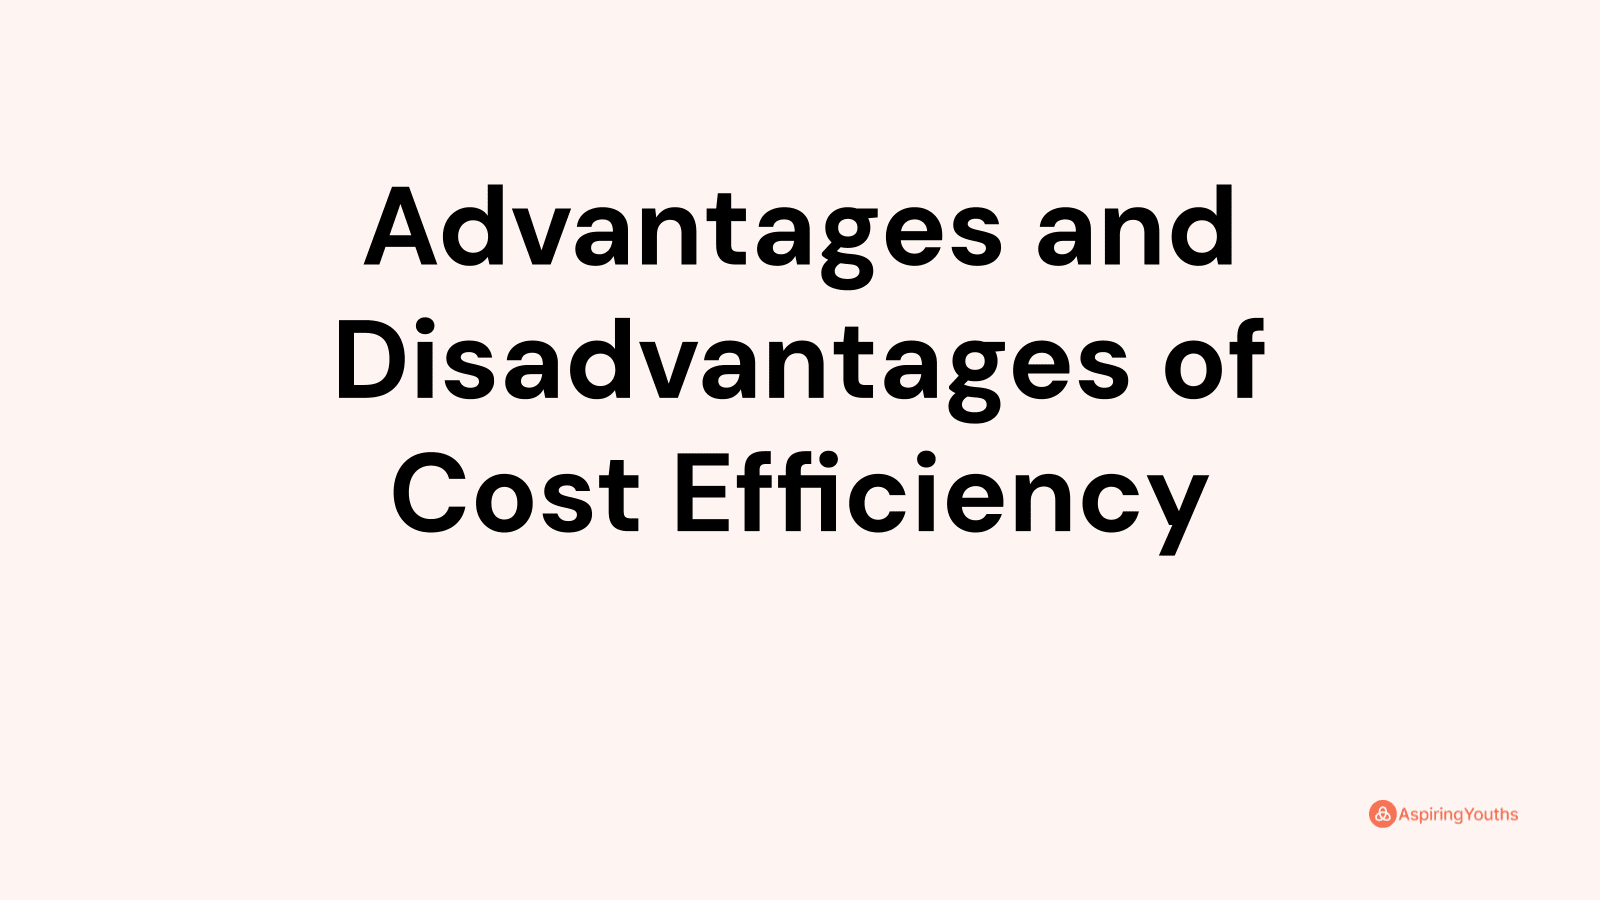 Advantages and disadvantages of Cost Efficiency